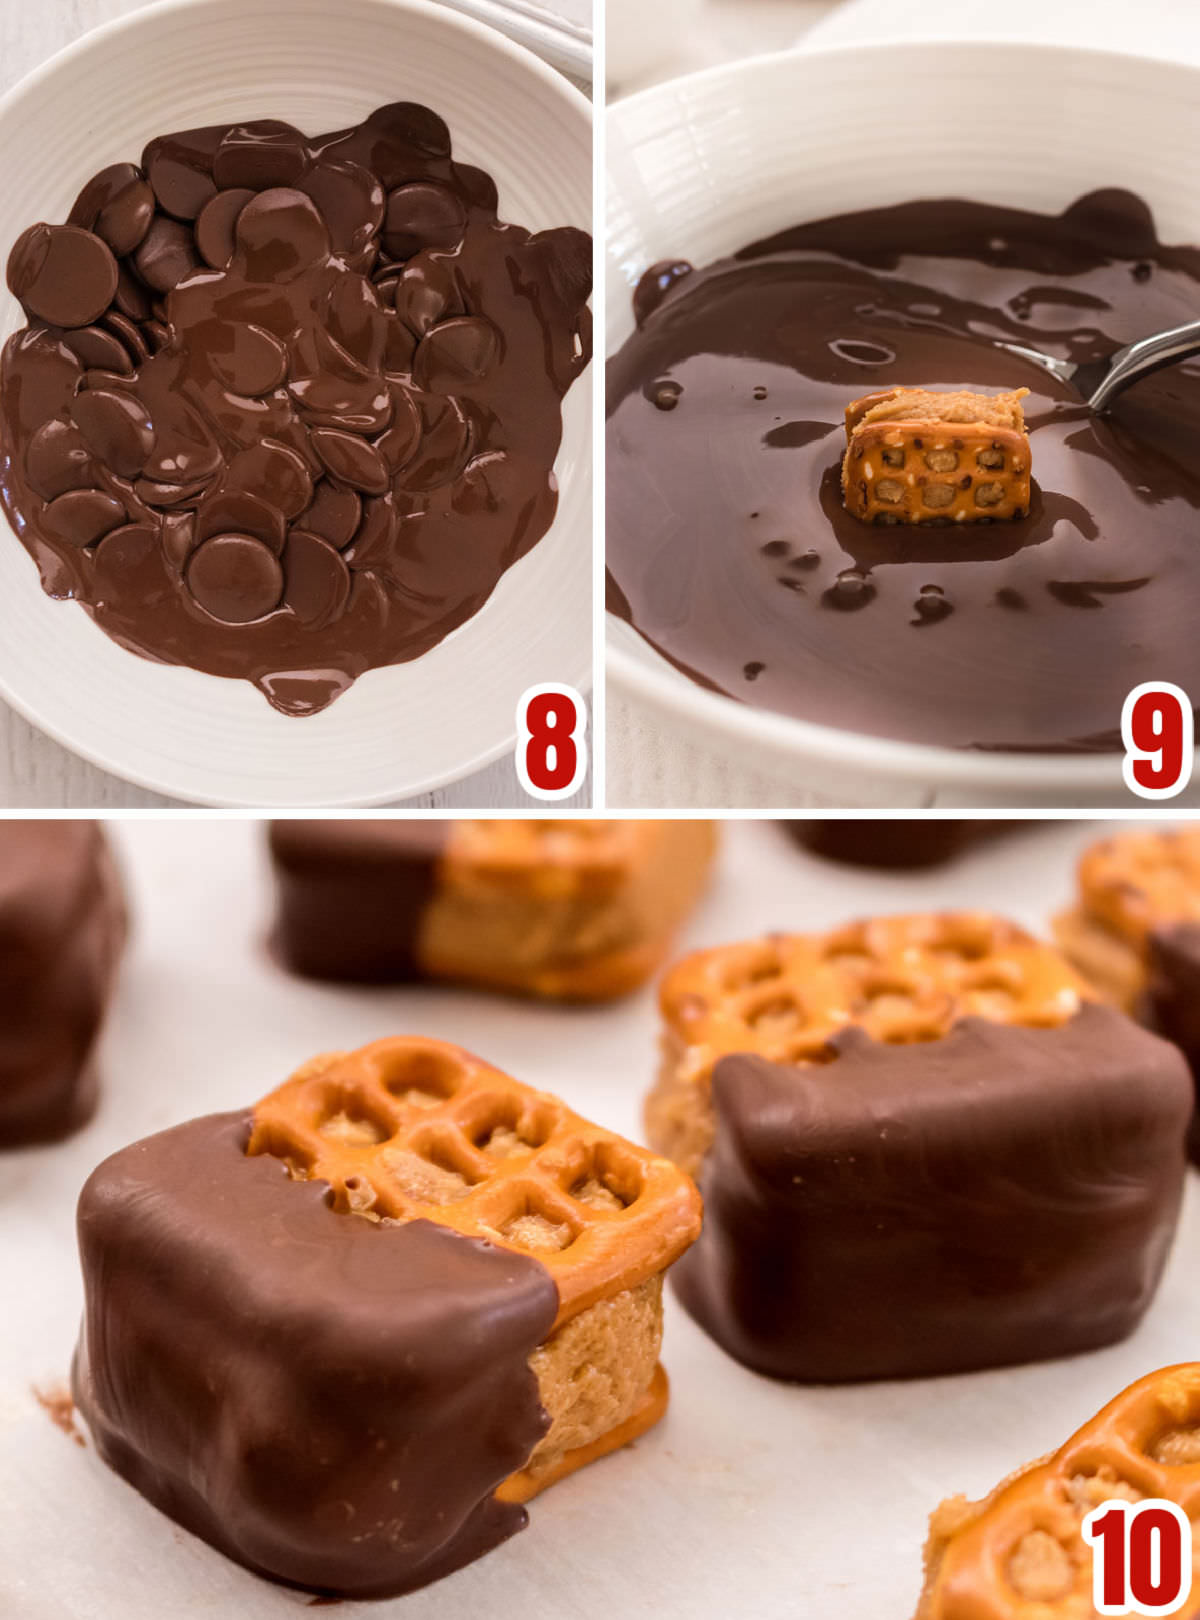 Collage image showing the steps for dipping the pretzel bites in chocolate.